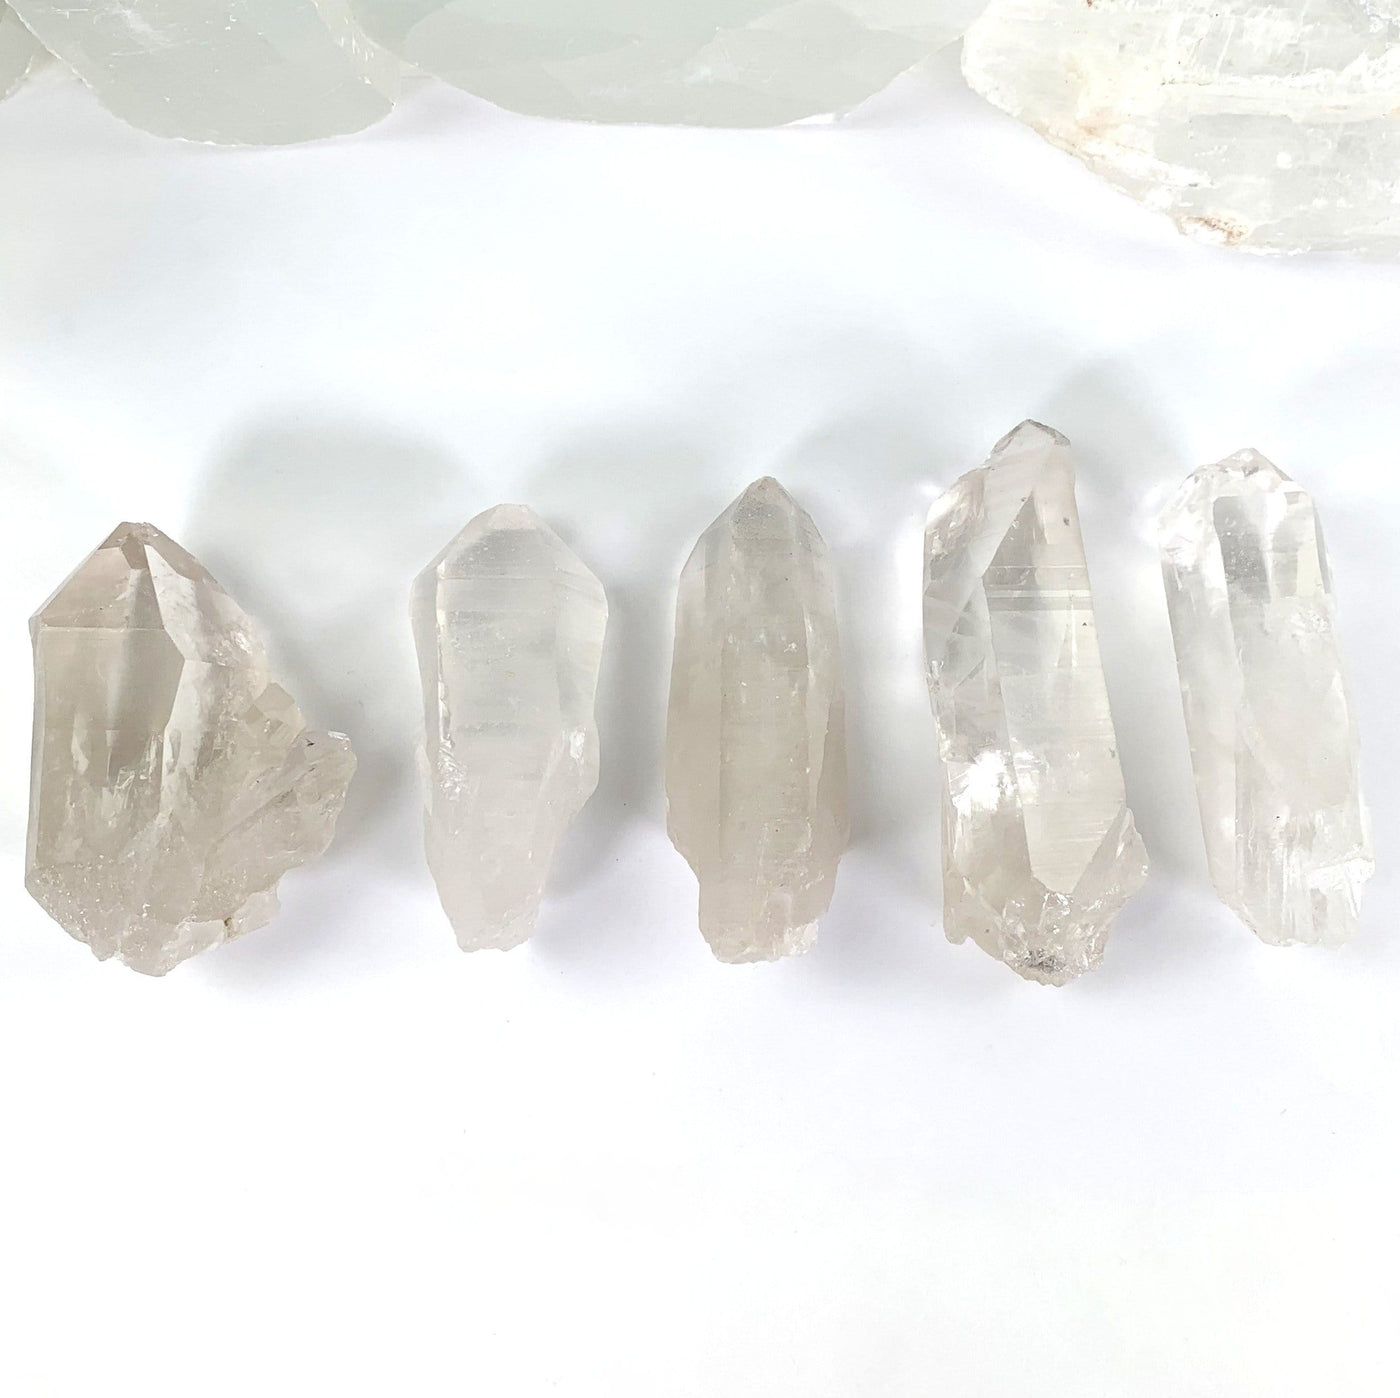 5 Natural Lemurian Quartz Points displayed to show various formations